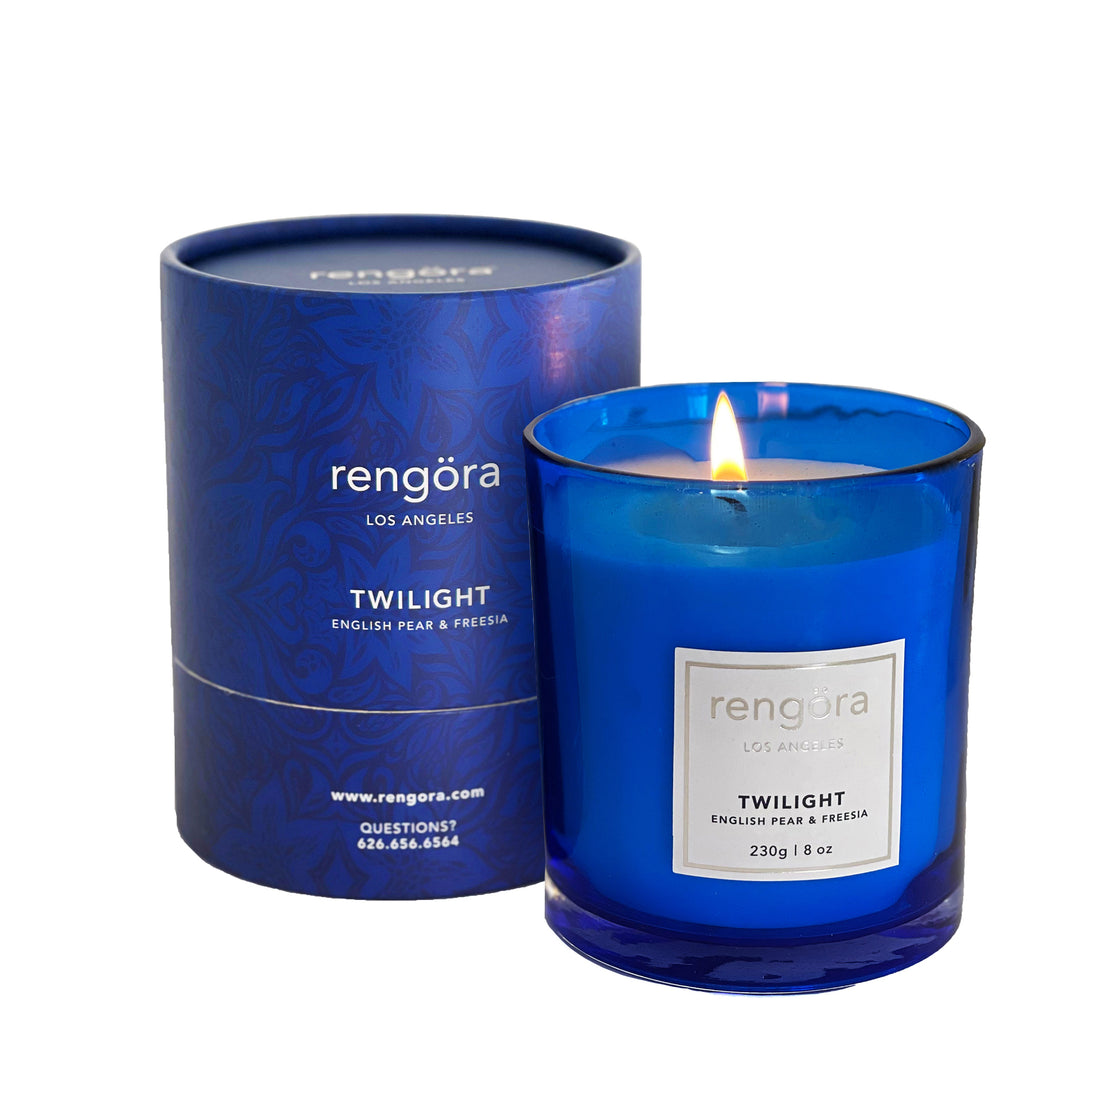 beautiful gift-ready packaging for rengöra's soy wax candle in blue glass